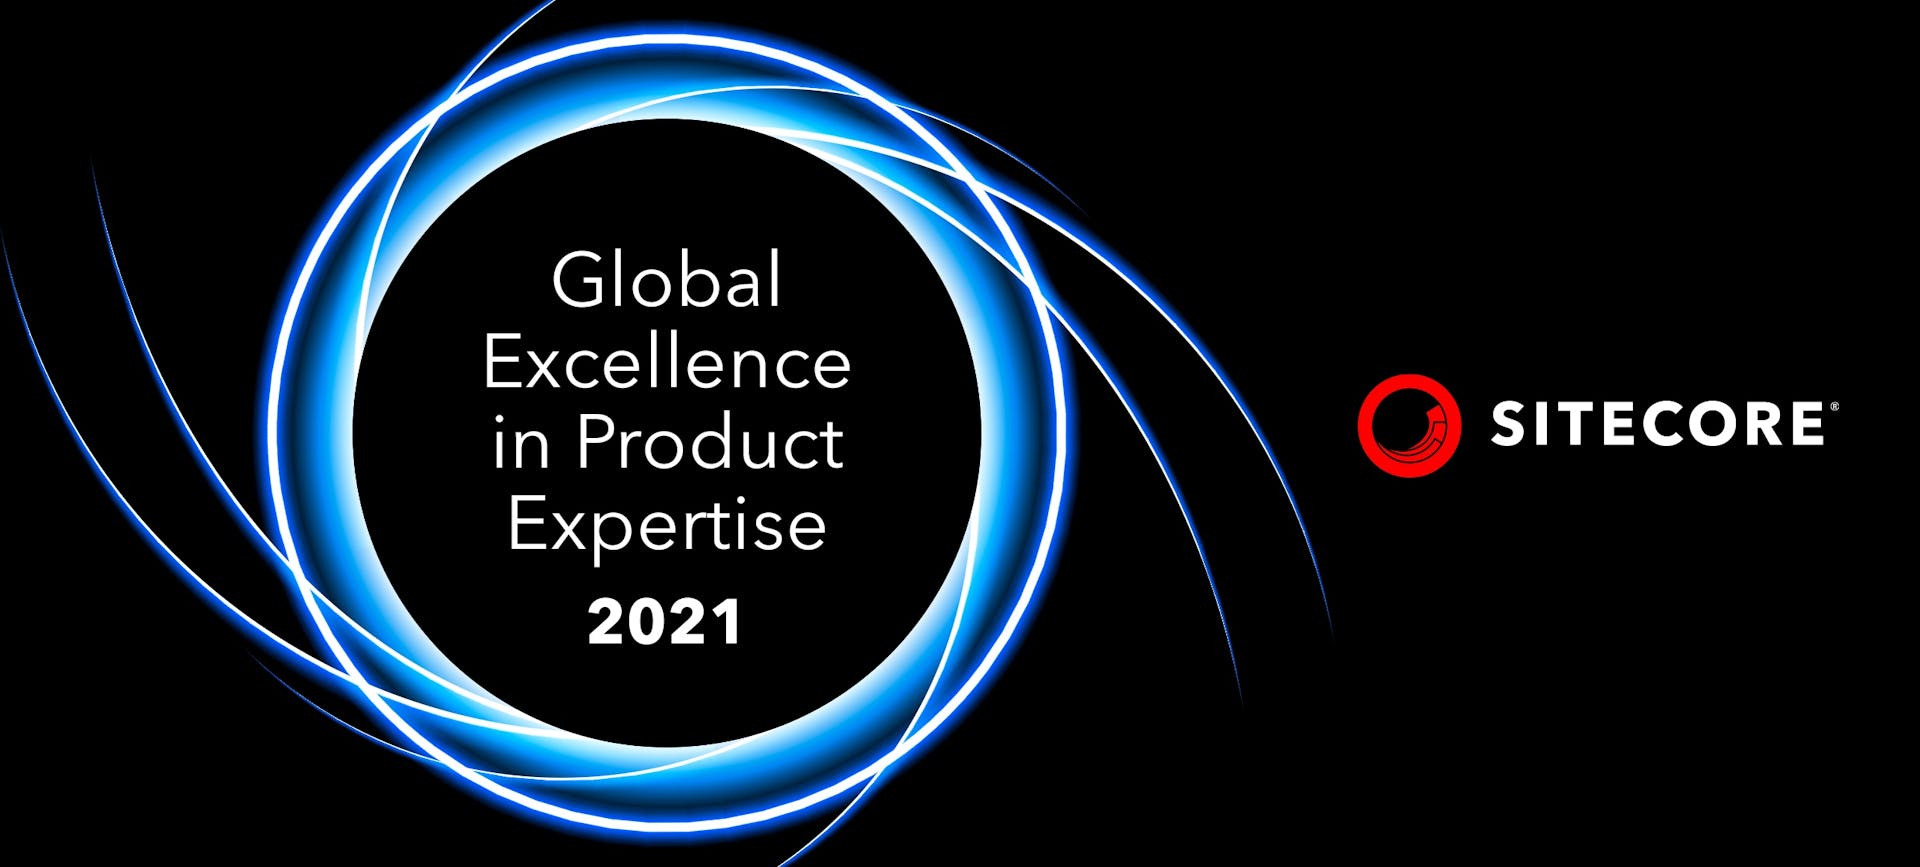 Global Excellence in Product Expertise 2021 Sitecore logo